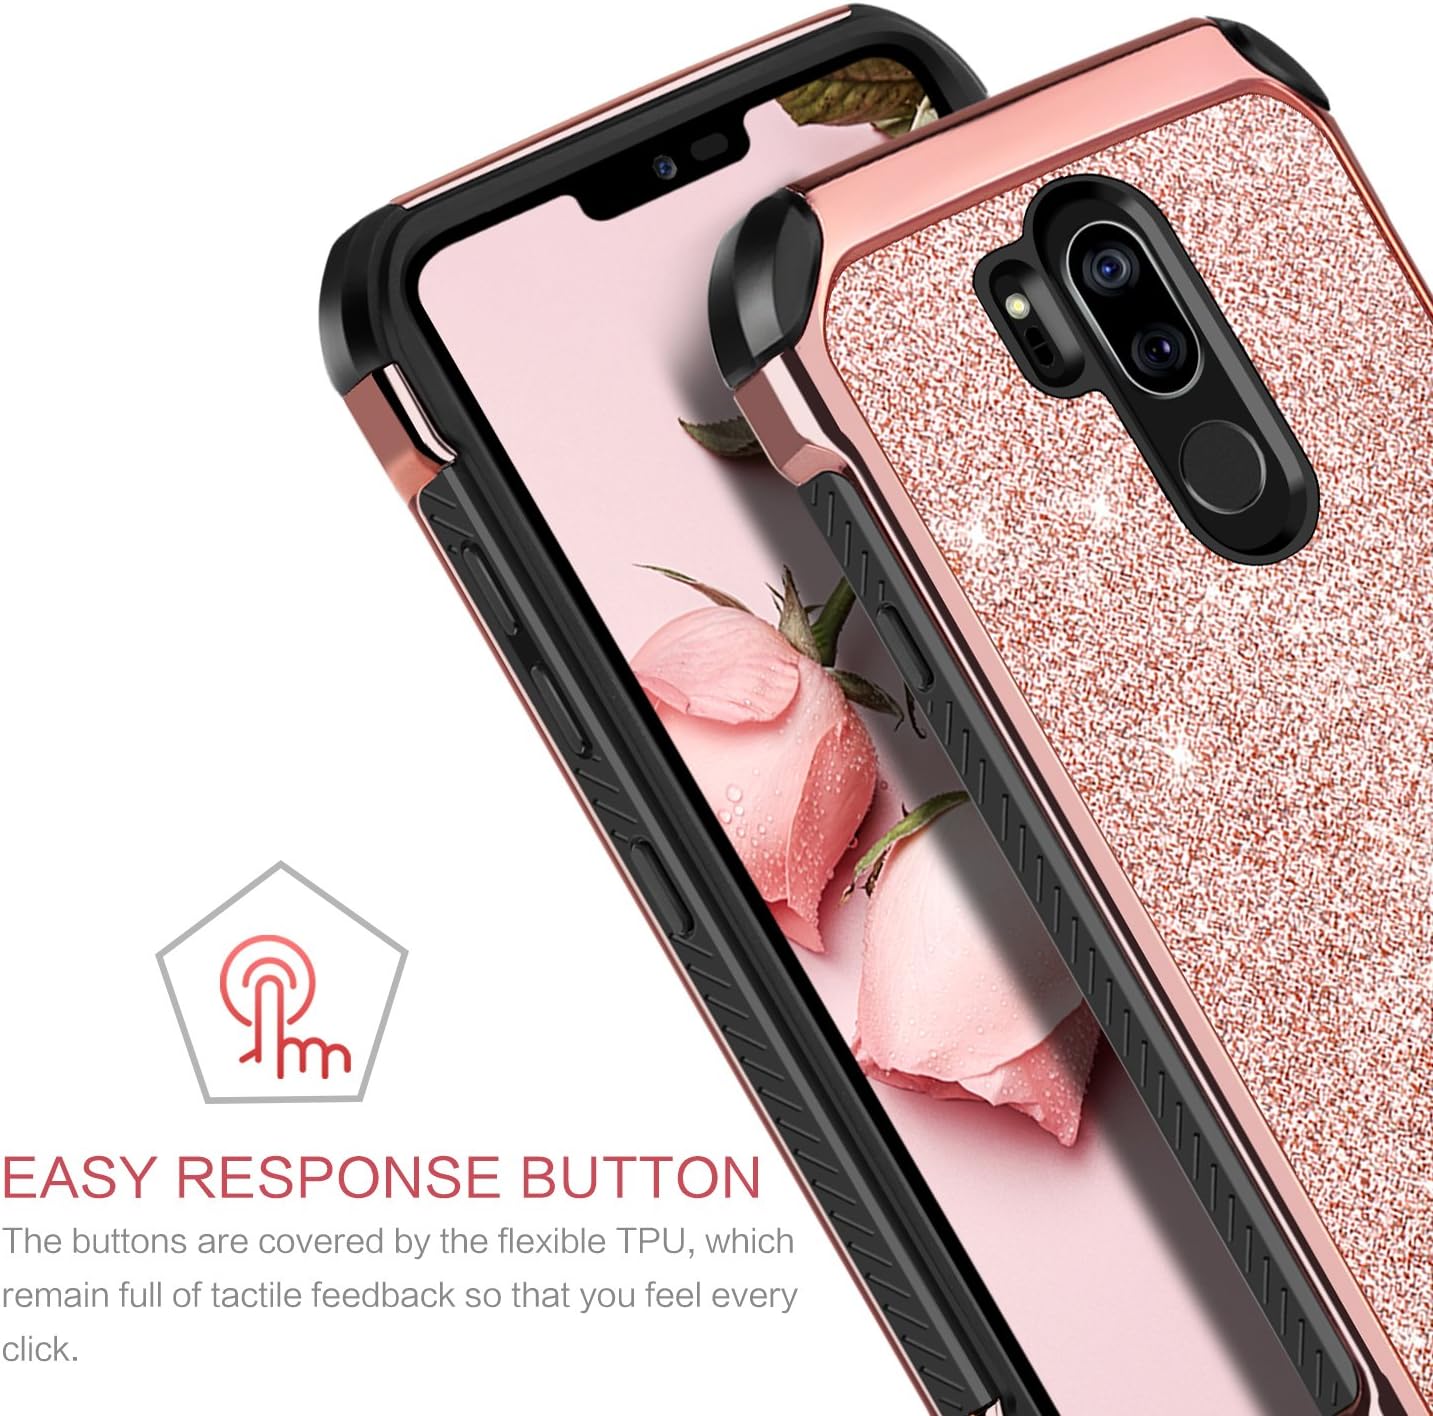 BENTOBEN Case for LG G7 ThinQ, Case for LG G7, Heavy Duty 2 in 1 Hybrid Hard PC Soft TPU Laminated Shiny Faux Leather Chrome Shockproof Cover Protective Phone Case for LG G7/LG G7 ThinQ, Rose Gold